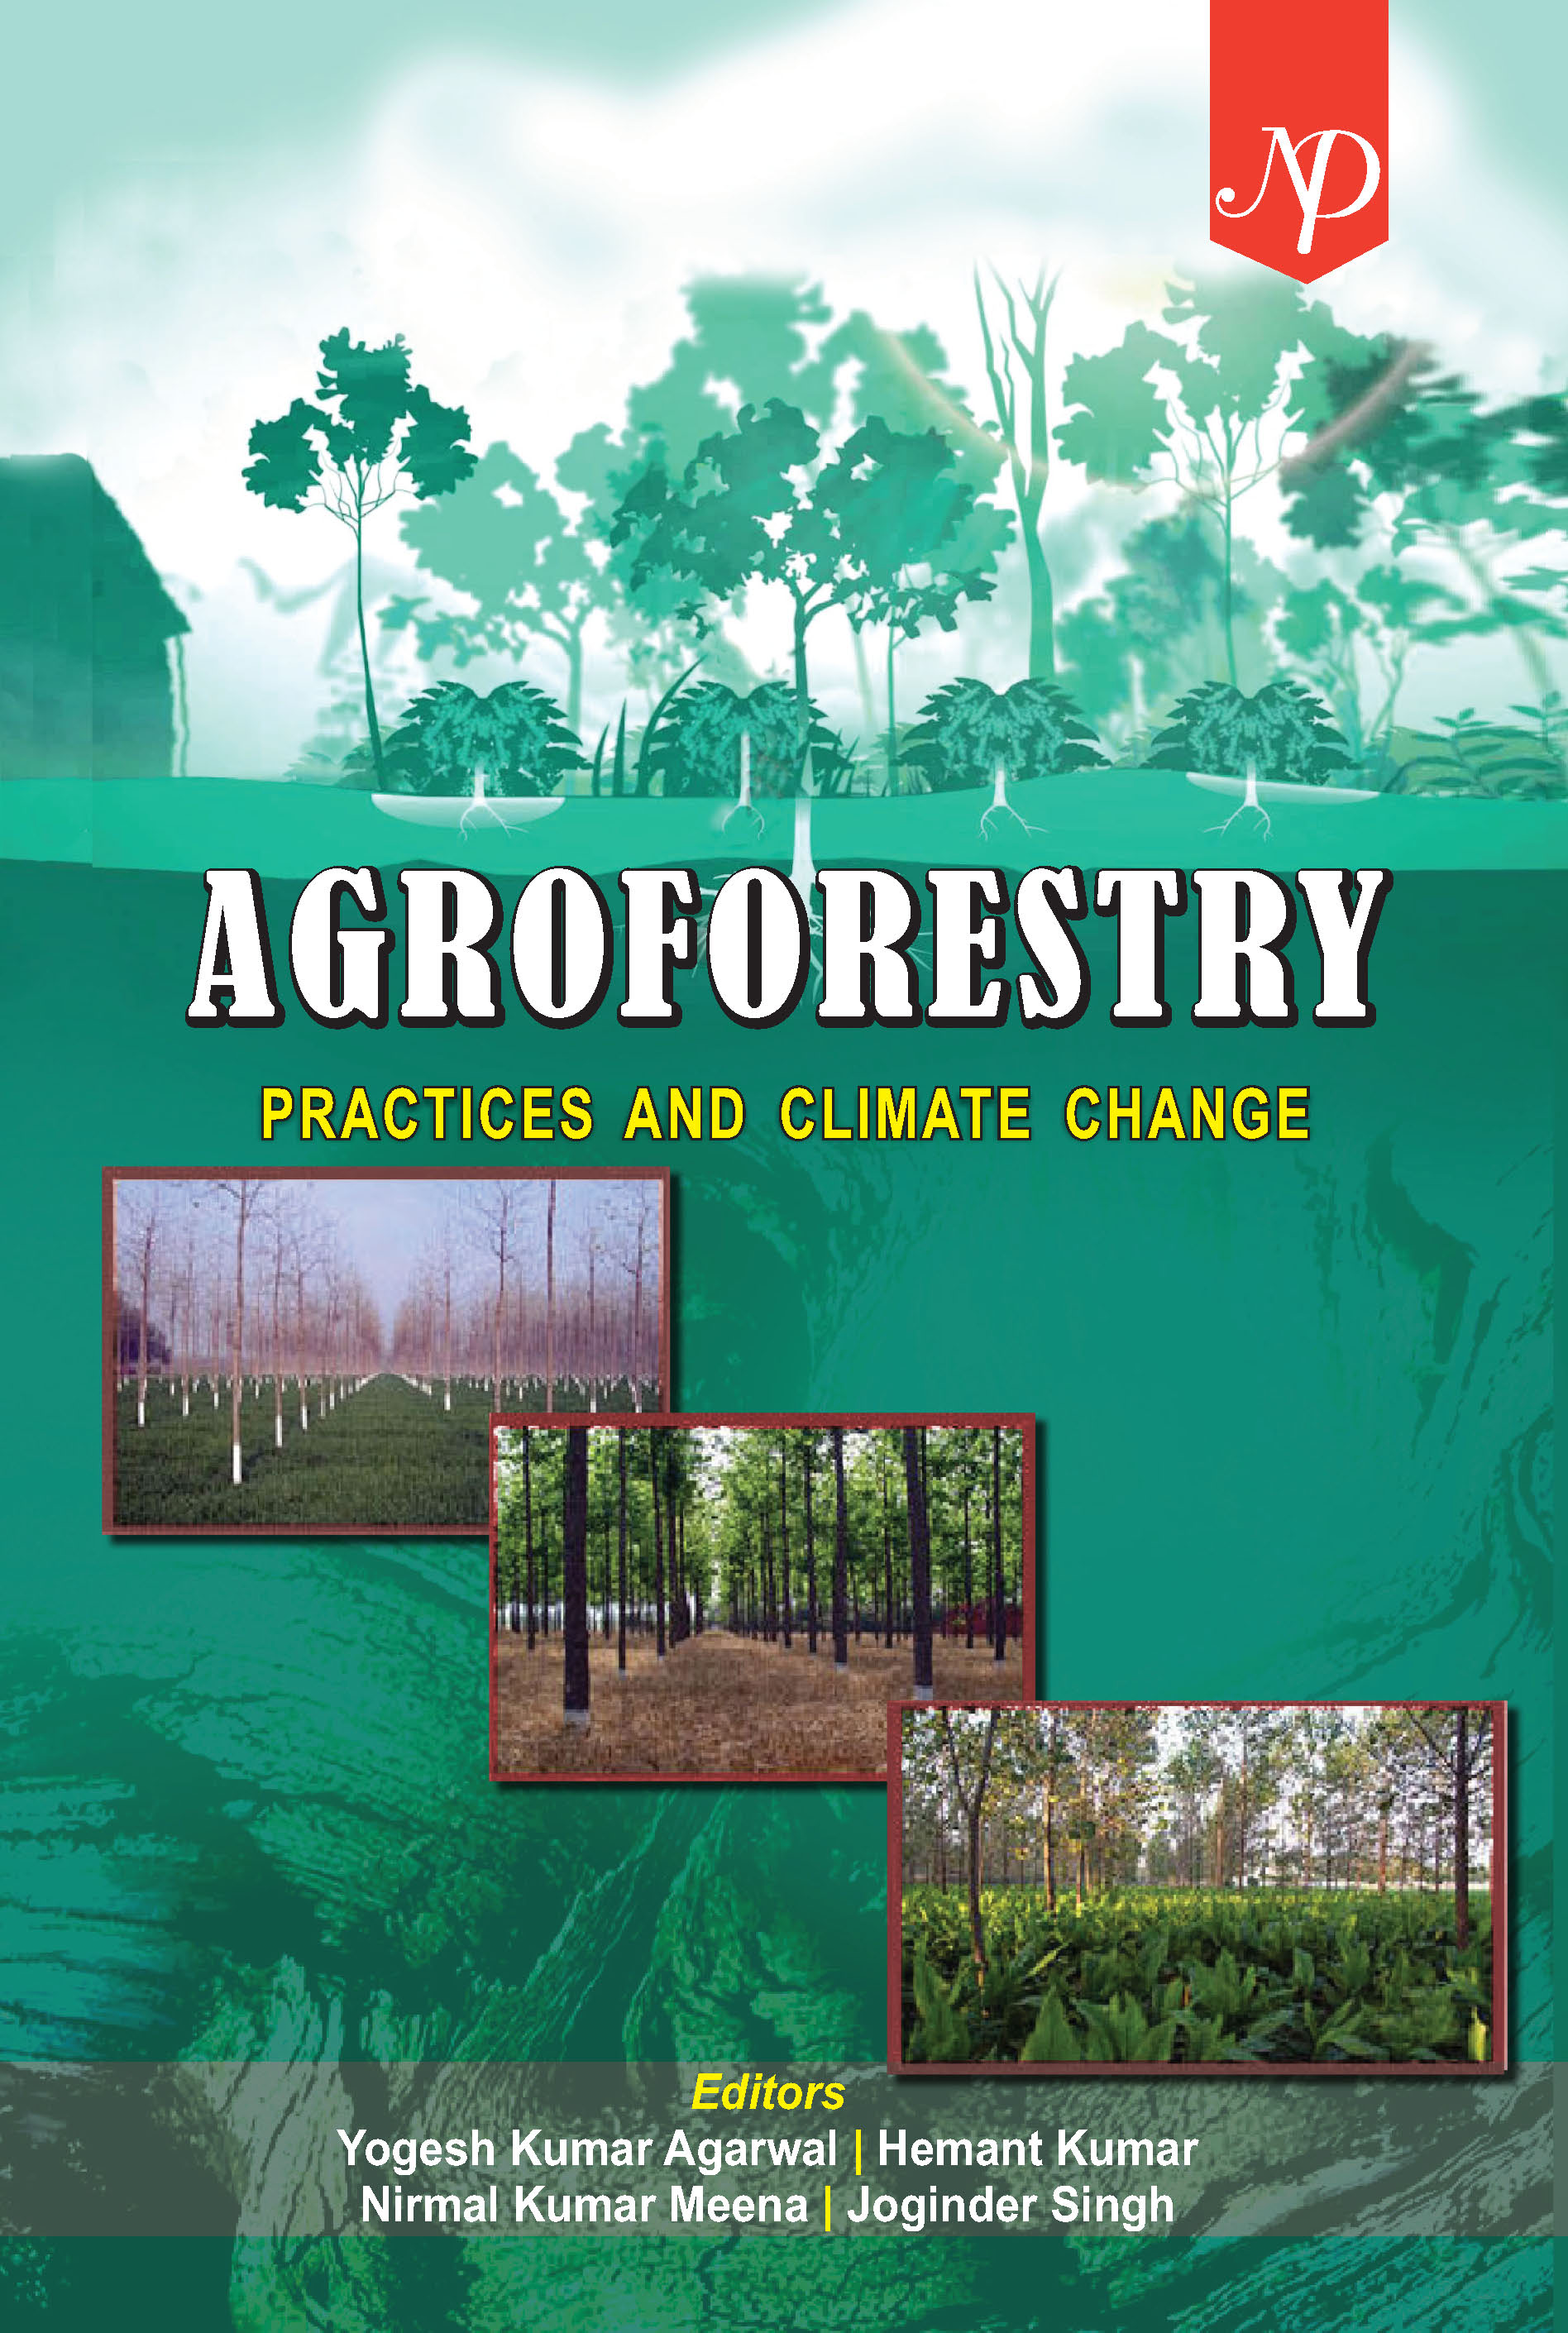 Agroforestry practices and climate change Cover.jpg